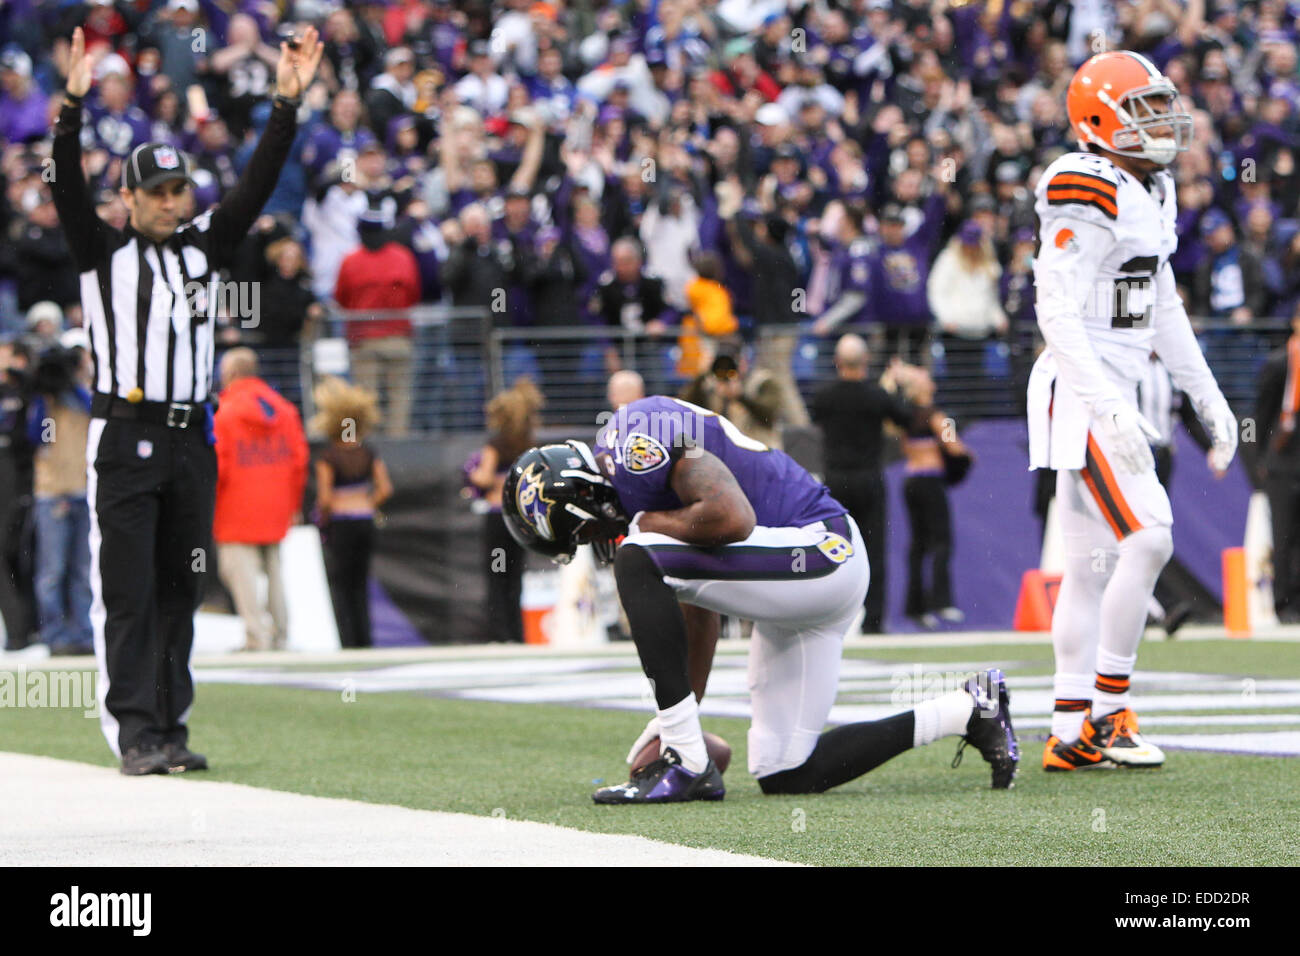 Baltimore, Maryland, USA. 28th Dec, 2014. Baltimore Ravens wide receiver Torrey Smith (82) celebates in the endzone as Cleveland Browns defensive back Buster Skrine (22) walks away on December 28, 2014 at M&T Bank Stadium. © Debby Wong/ZUMA Wire/Alamy Live News Stock Photo